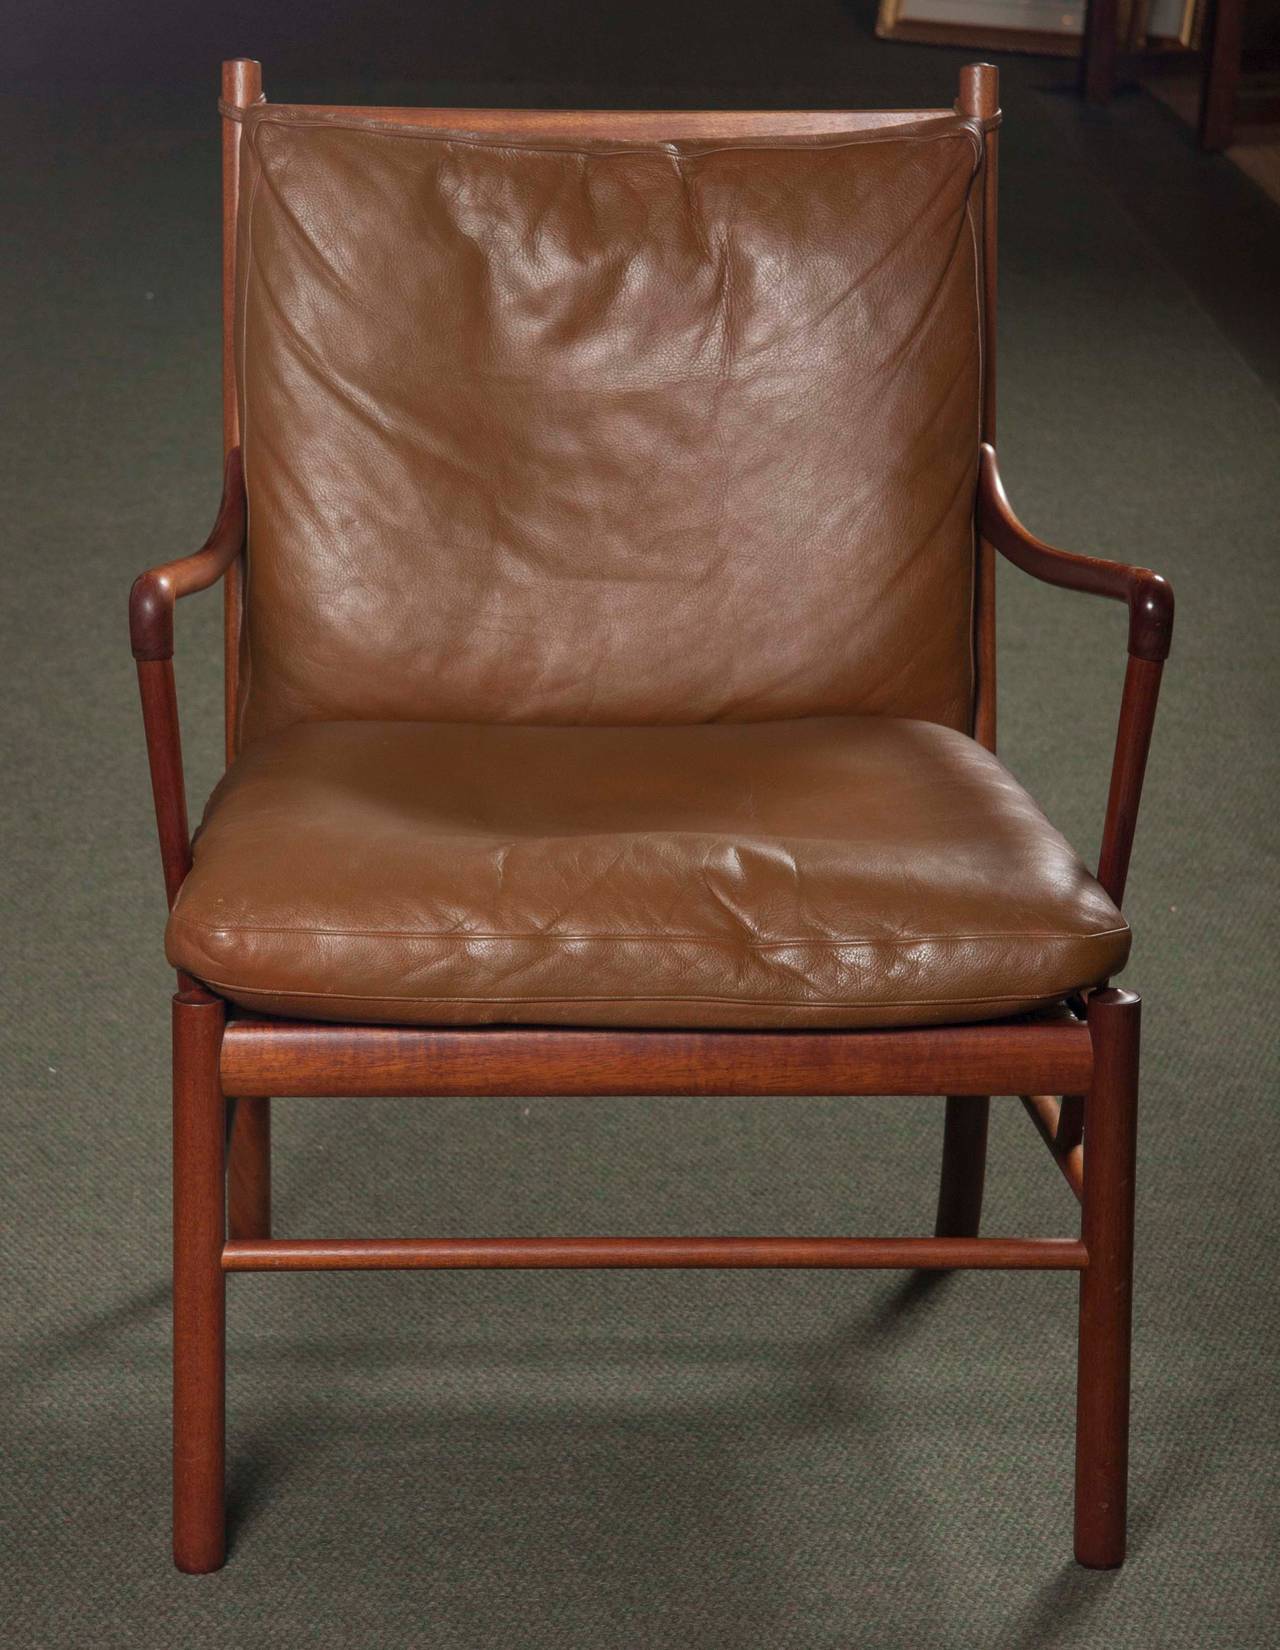 Ole Wanscher rosewood colonial chair OW/149 with peanut butter colored leather covered cushions; the under-seat of handwoven cane. Fine original condition. Dimensions: Seat height: 17.75.